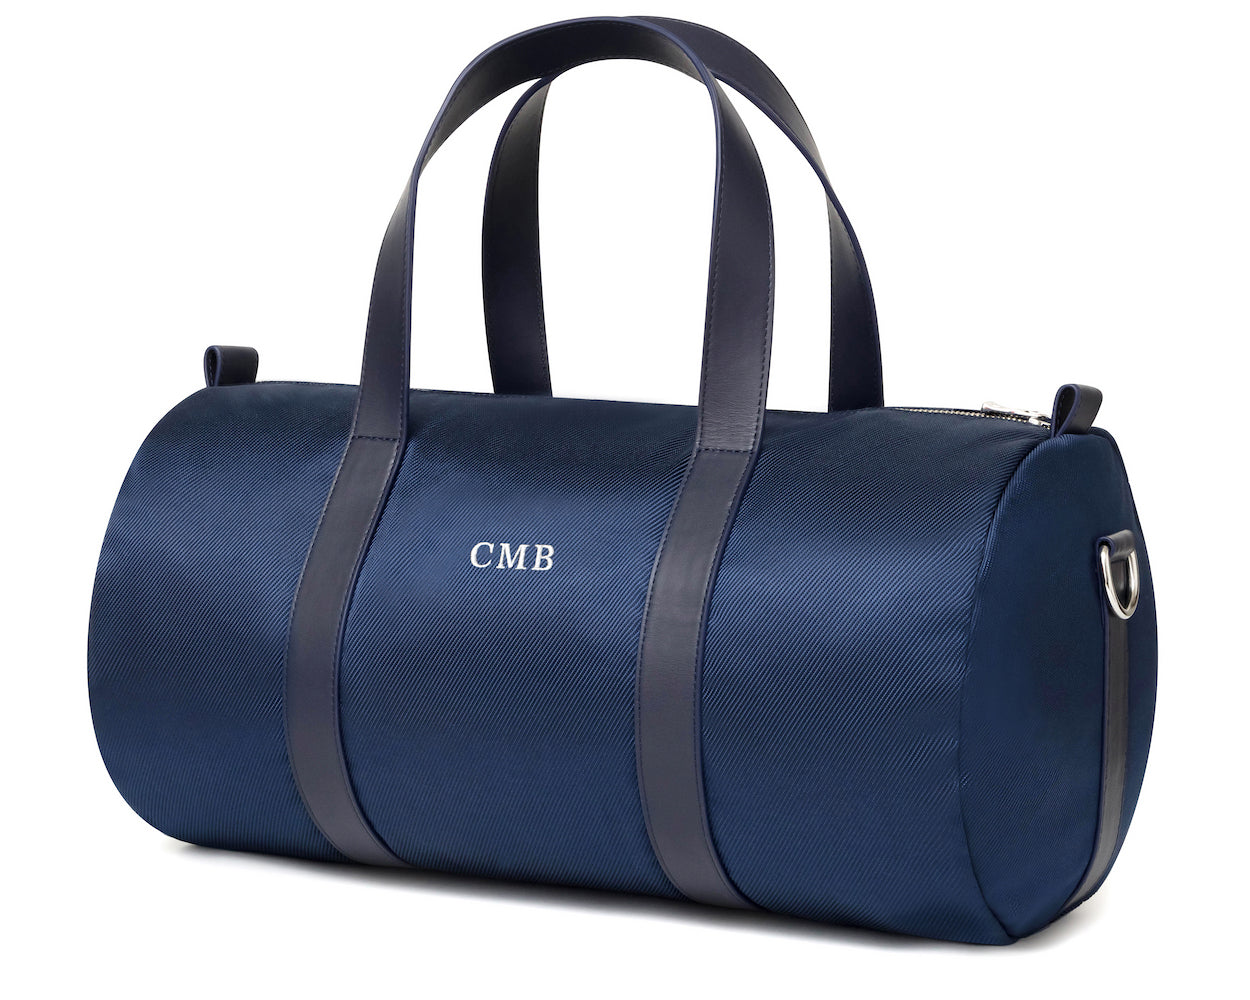 Navy banker bags with dark leather straps and embroidered lettering from Holderness and Bourne angled to the left.